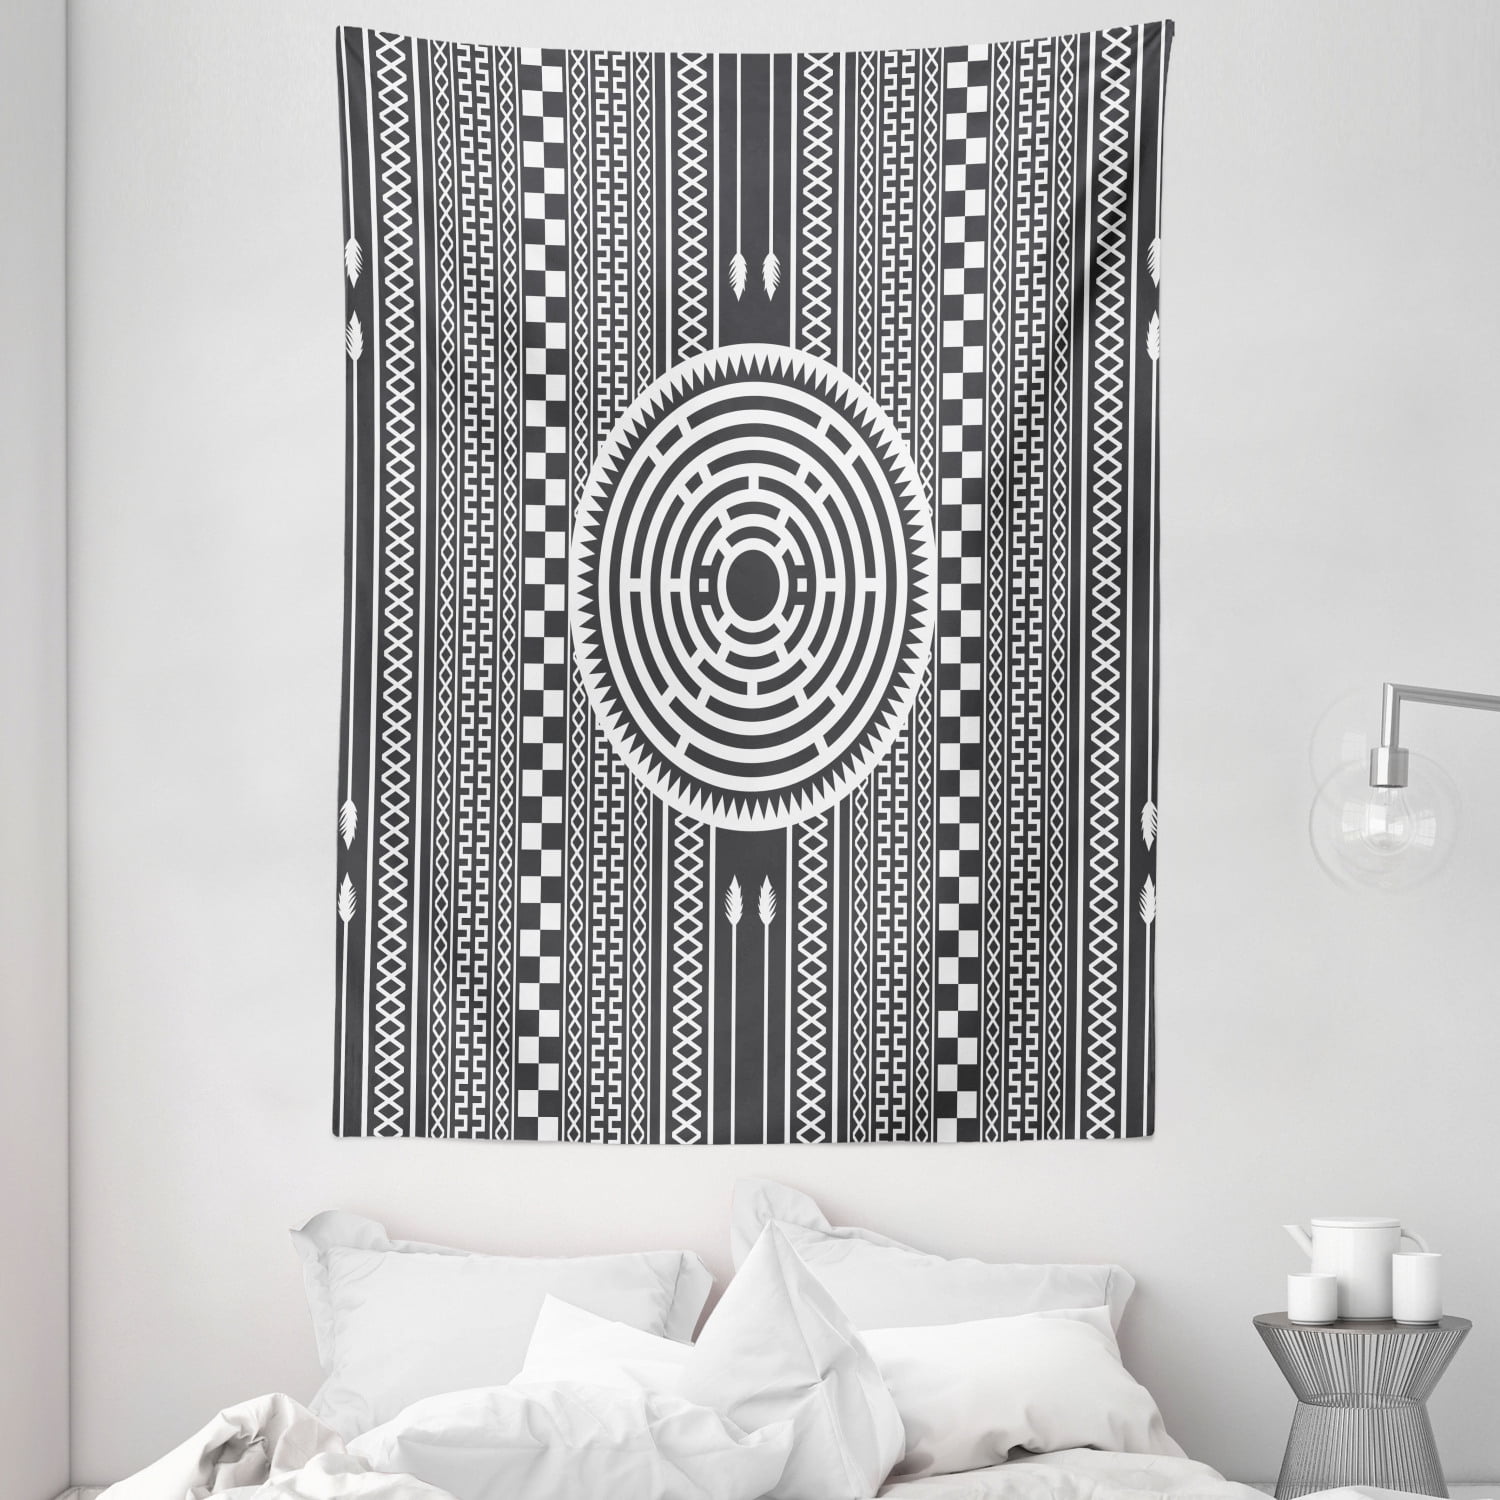 Monochrome Tapestry Wall Hanging Form Bedroom Dorm Room Decor 2 Sizes 